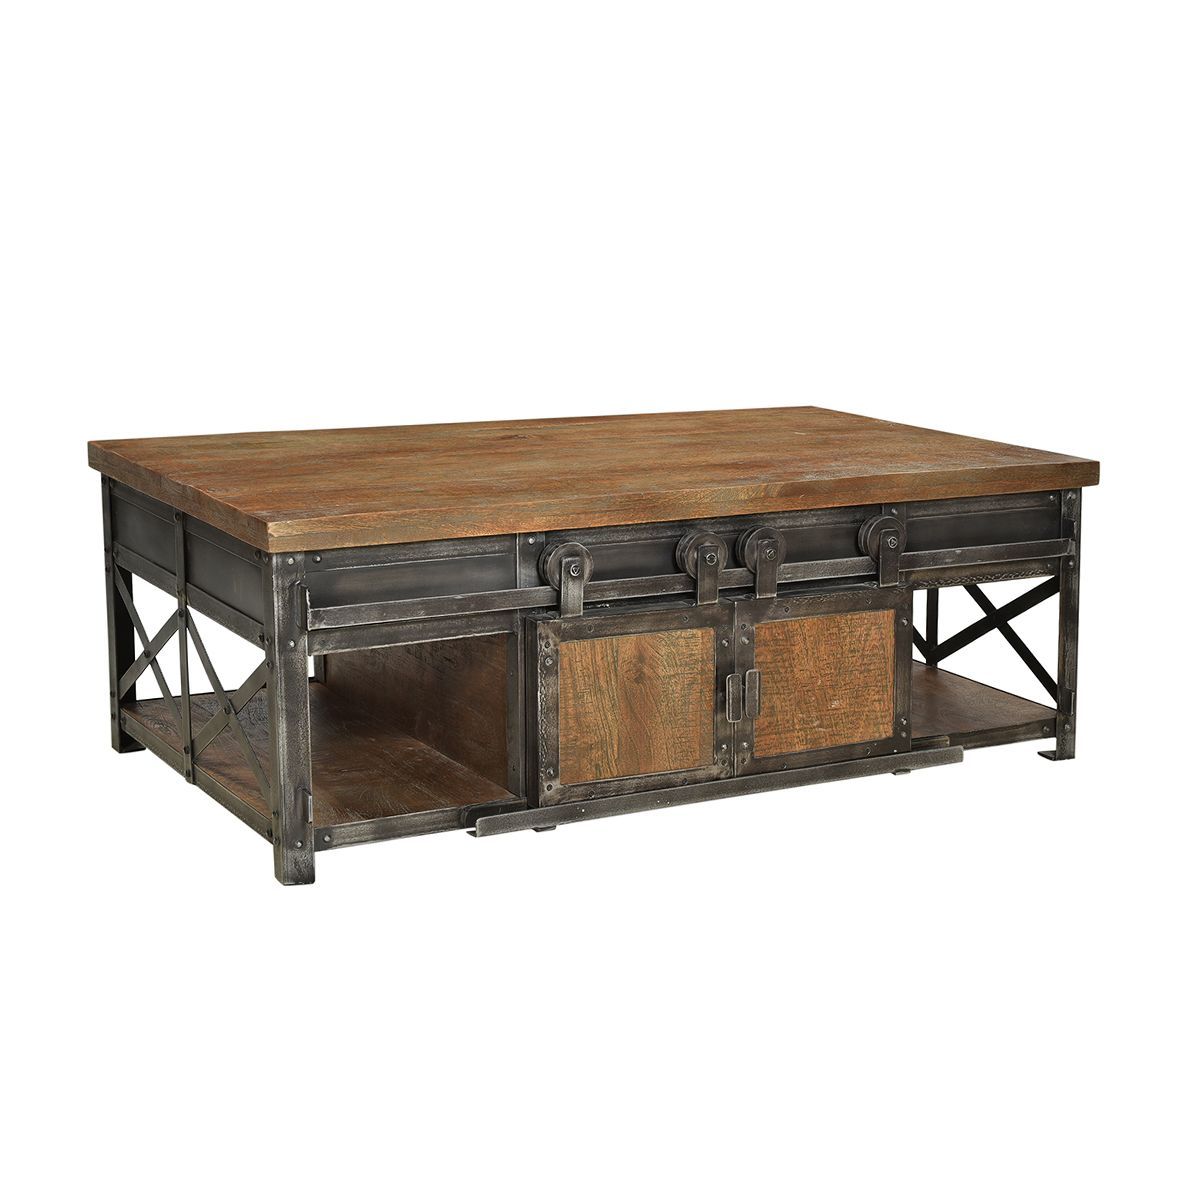 Reclaimed Mango Wood And Distressed Iron Coffee Table With Farmhouse For Coffee Tables With Sliding Barn Doors (Gallery 5 of 20)